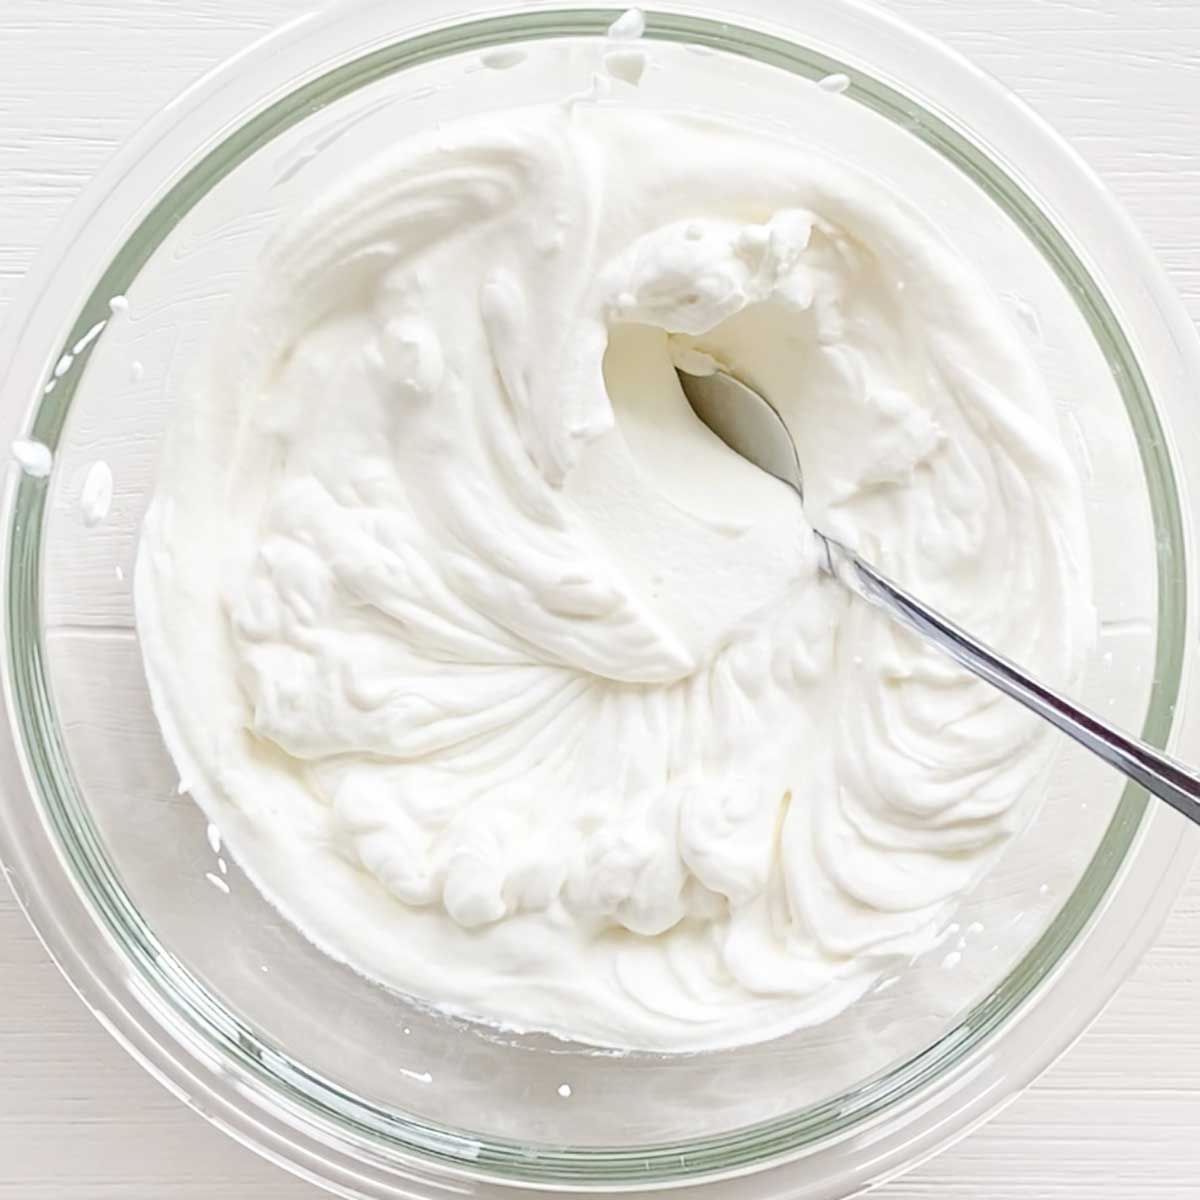 How to Make Vegan Vanilla Whipped Cream (Dairy-Free Chantilly Cream) - Peppermint Whipped Cream